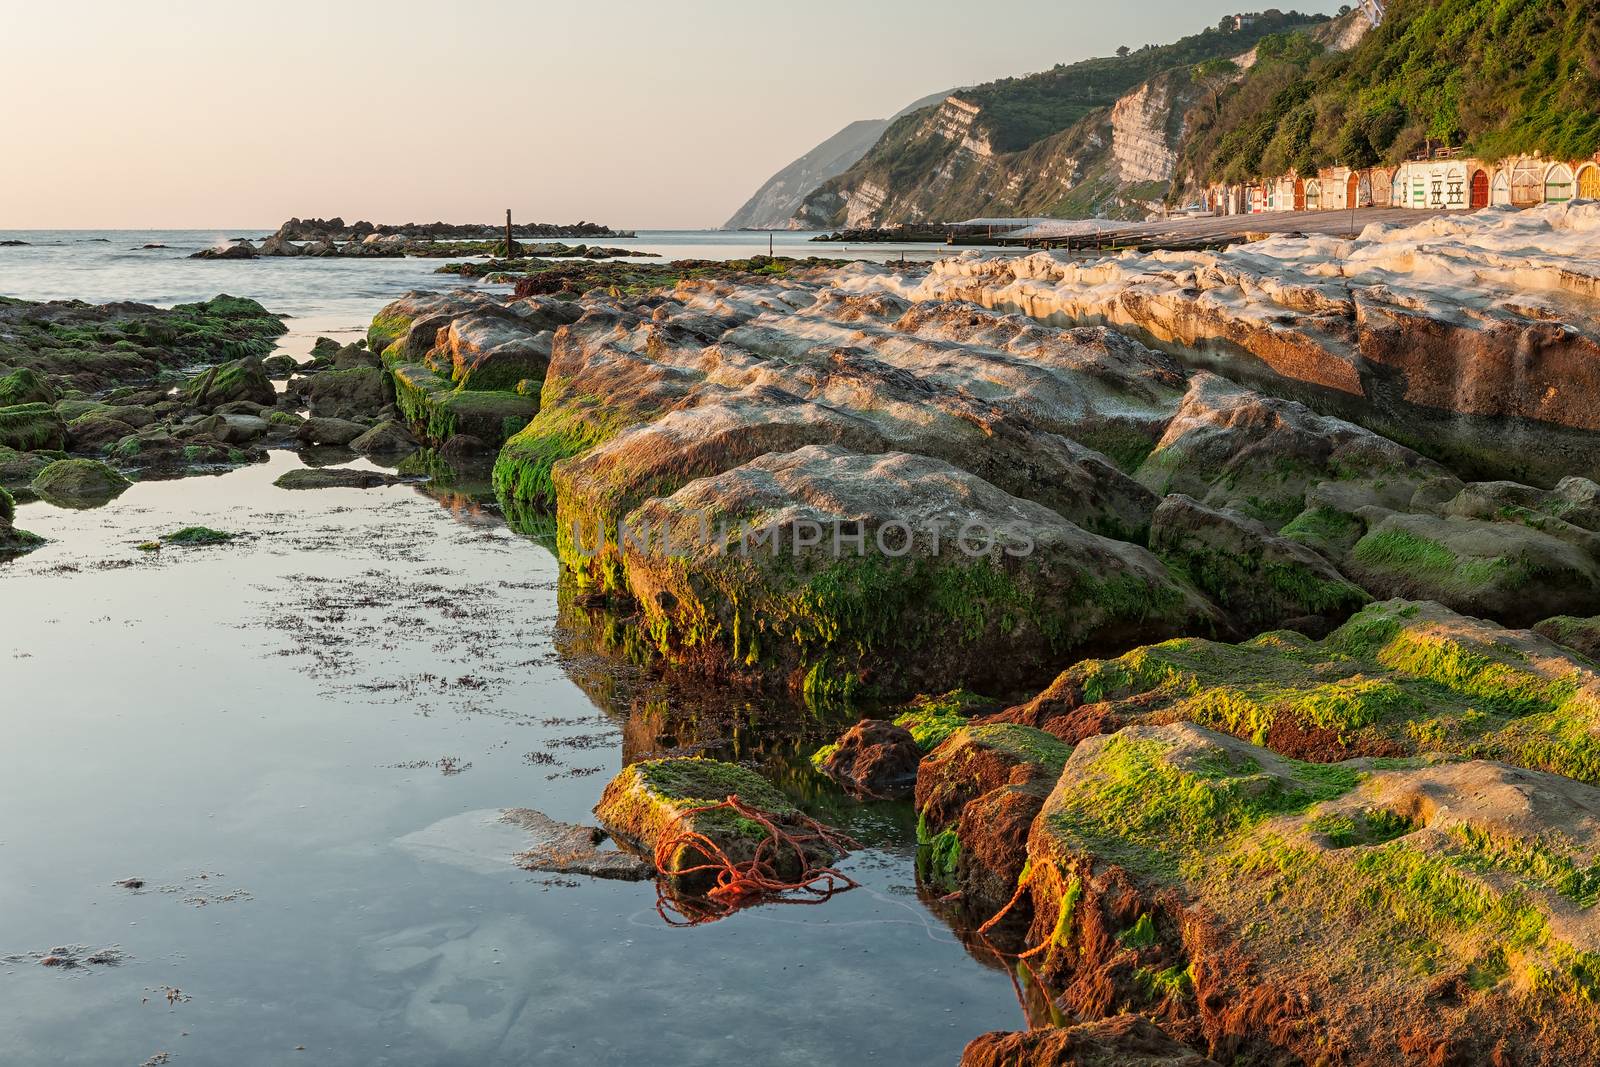 The passetto rocks reflected on the water at sunrise, Ancona, Italy